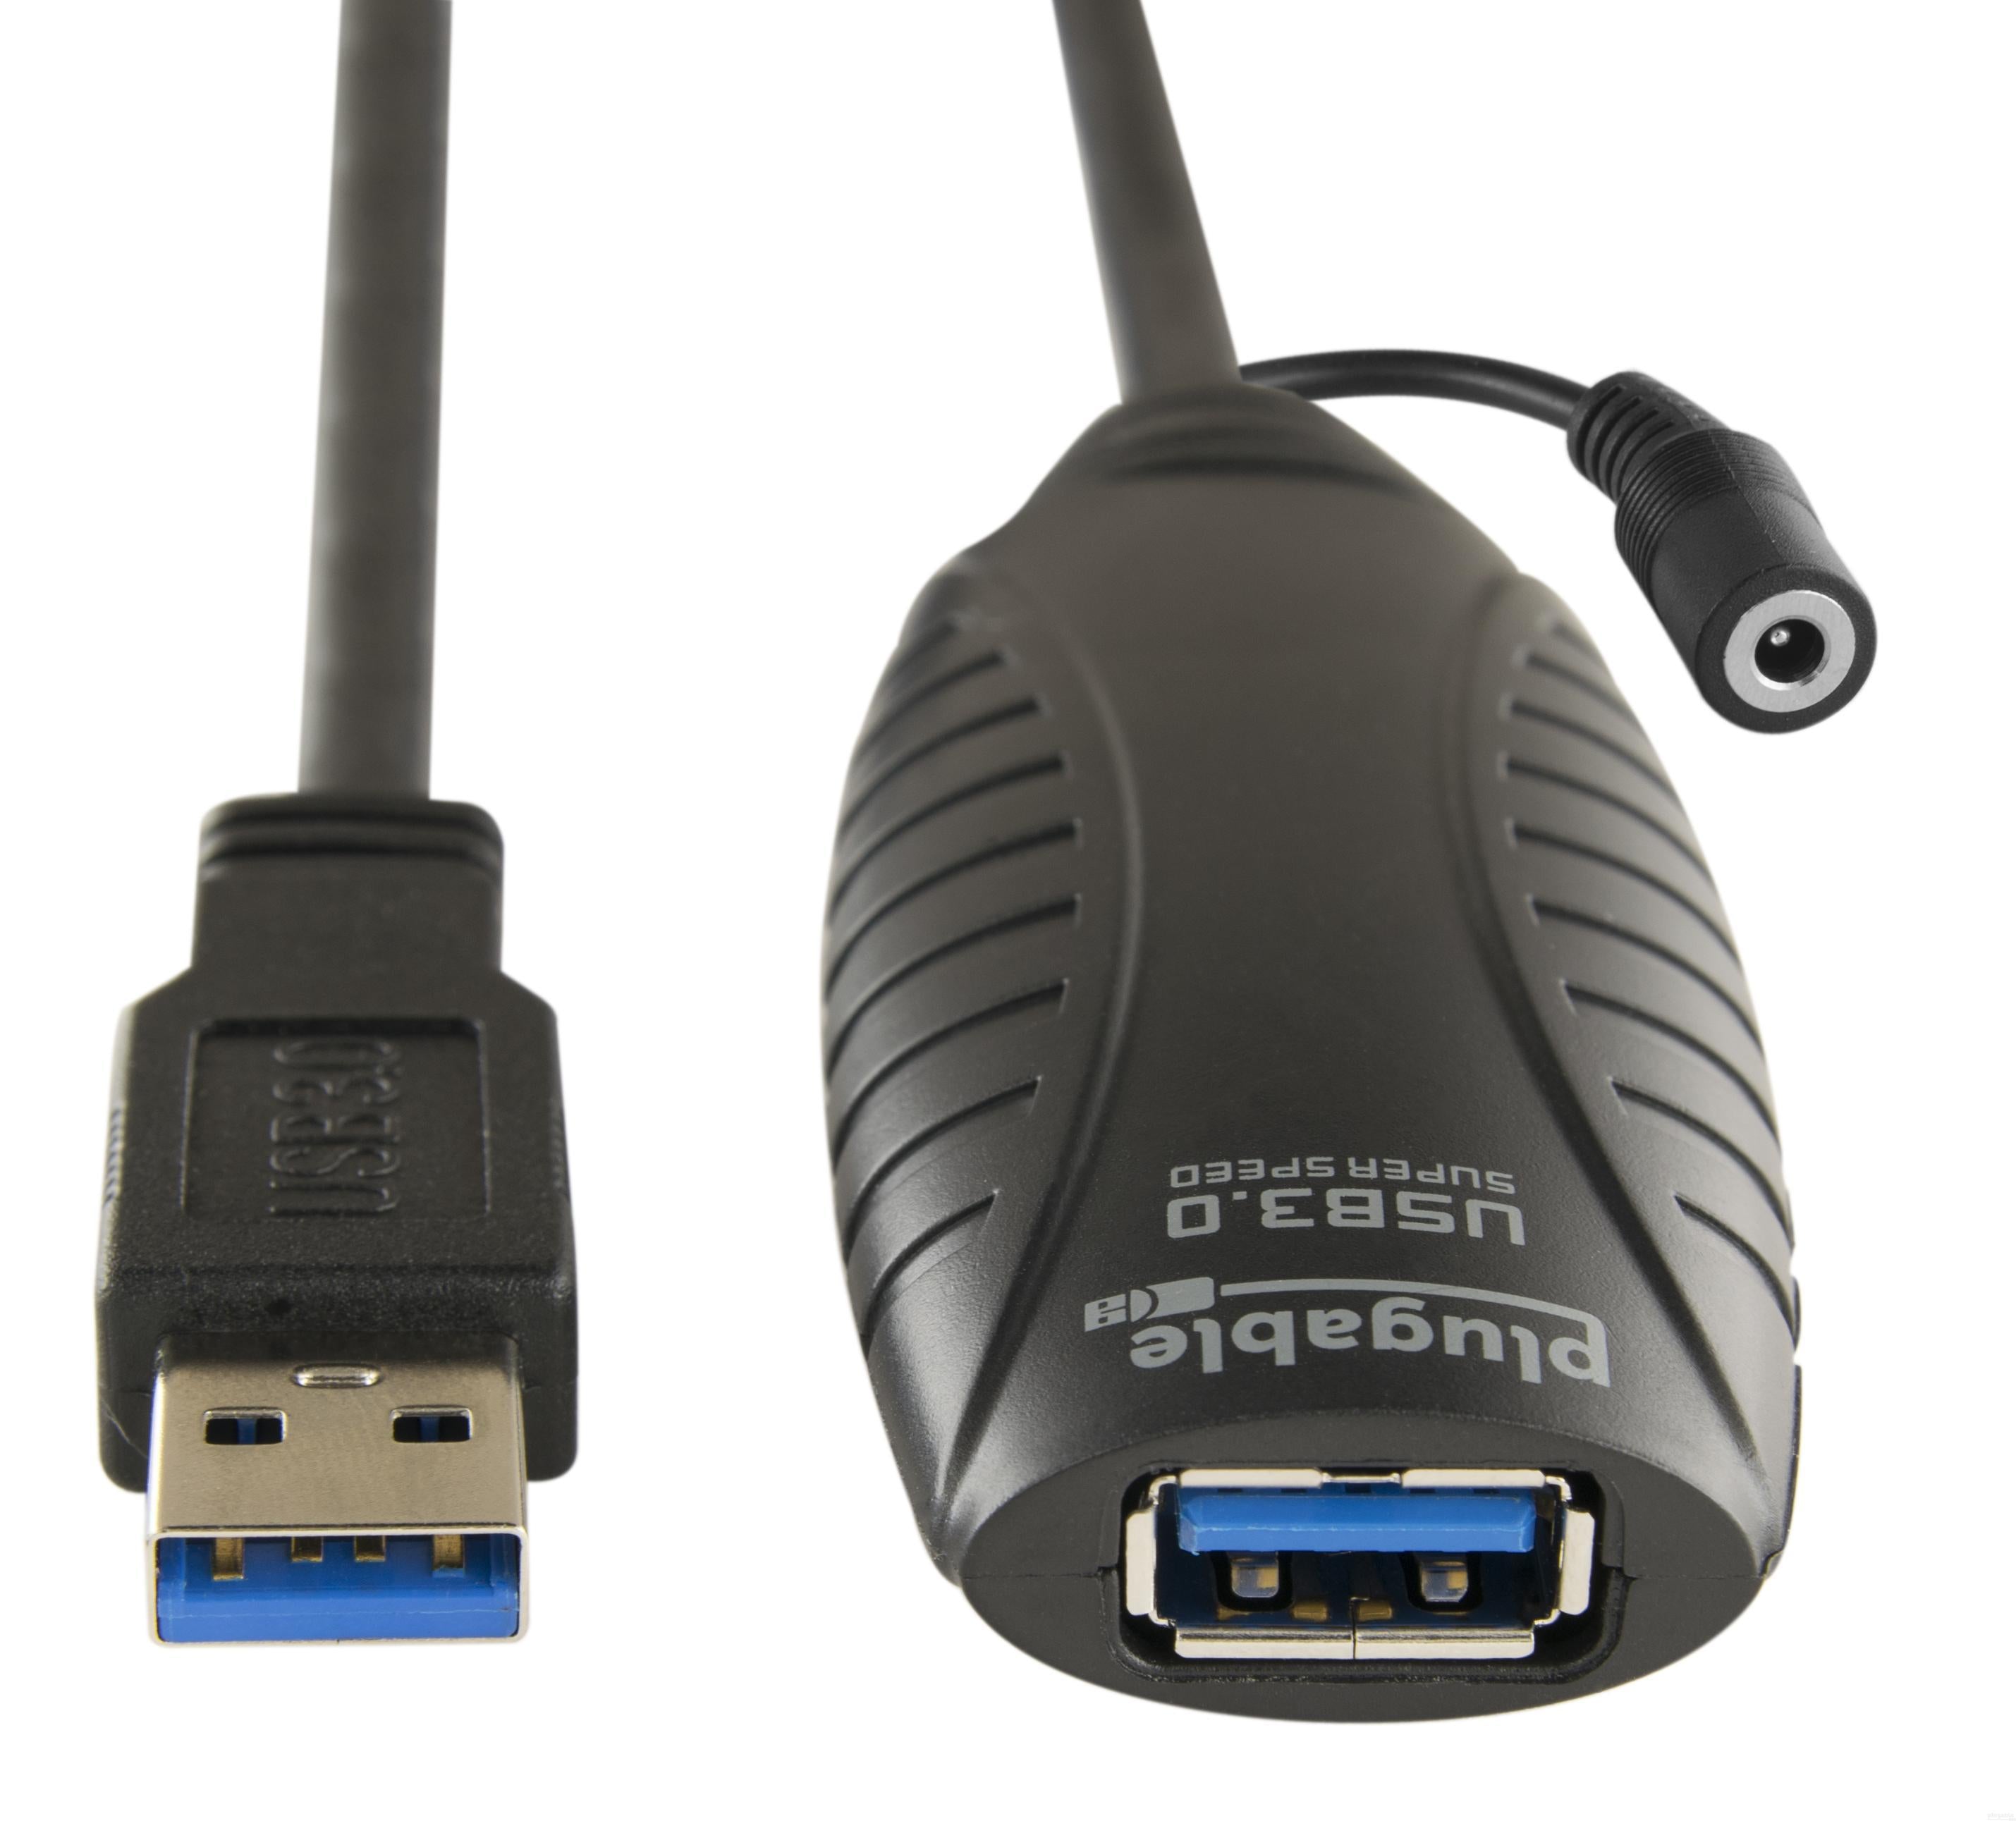 Plugable USB 3.0 10M (32ft) Extension with Adapter Bac – Plugable Technologies